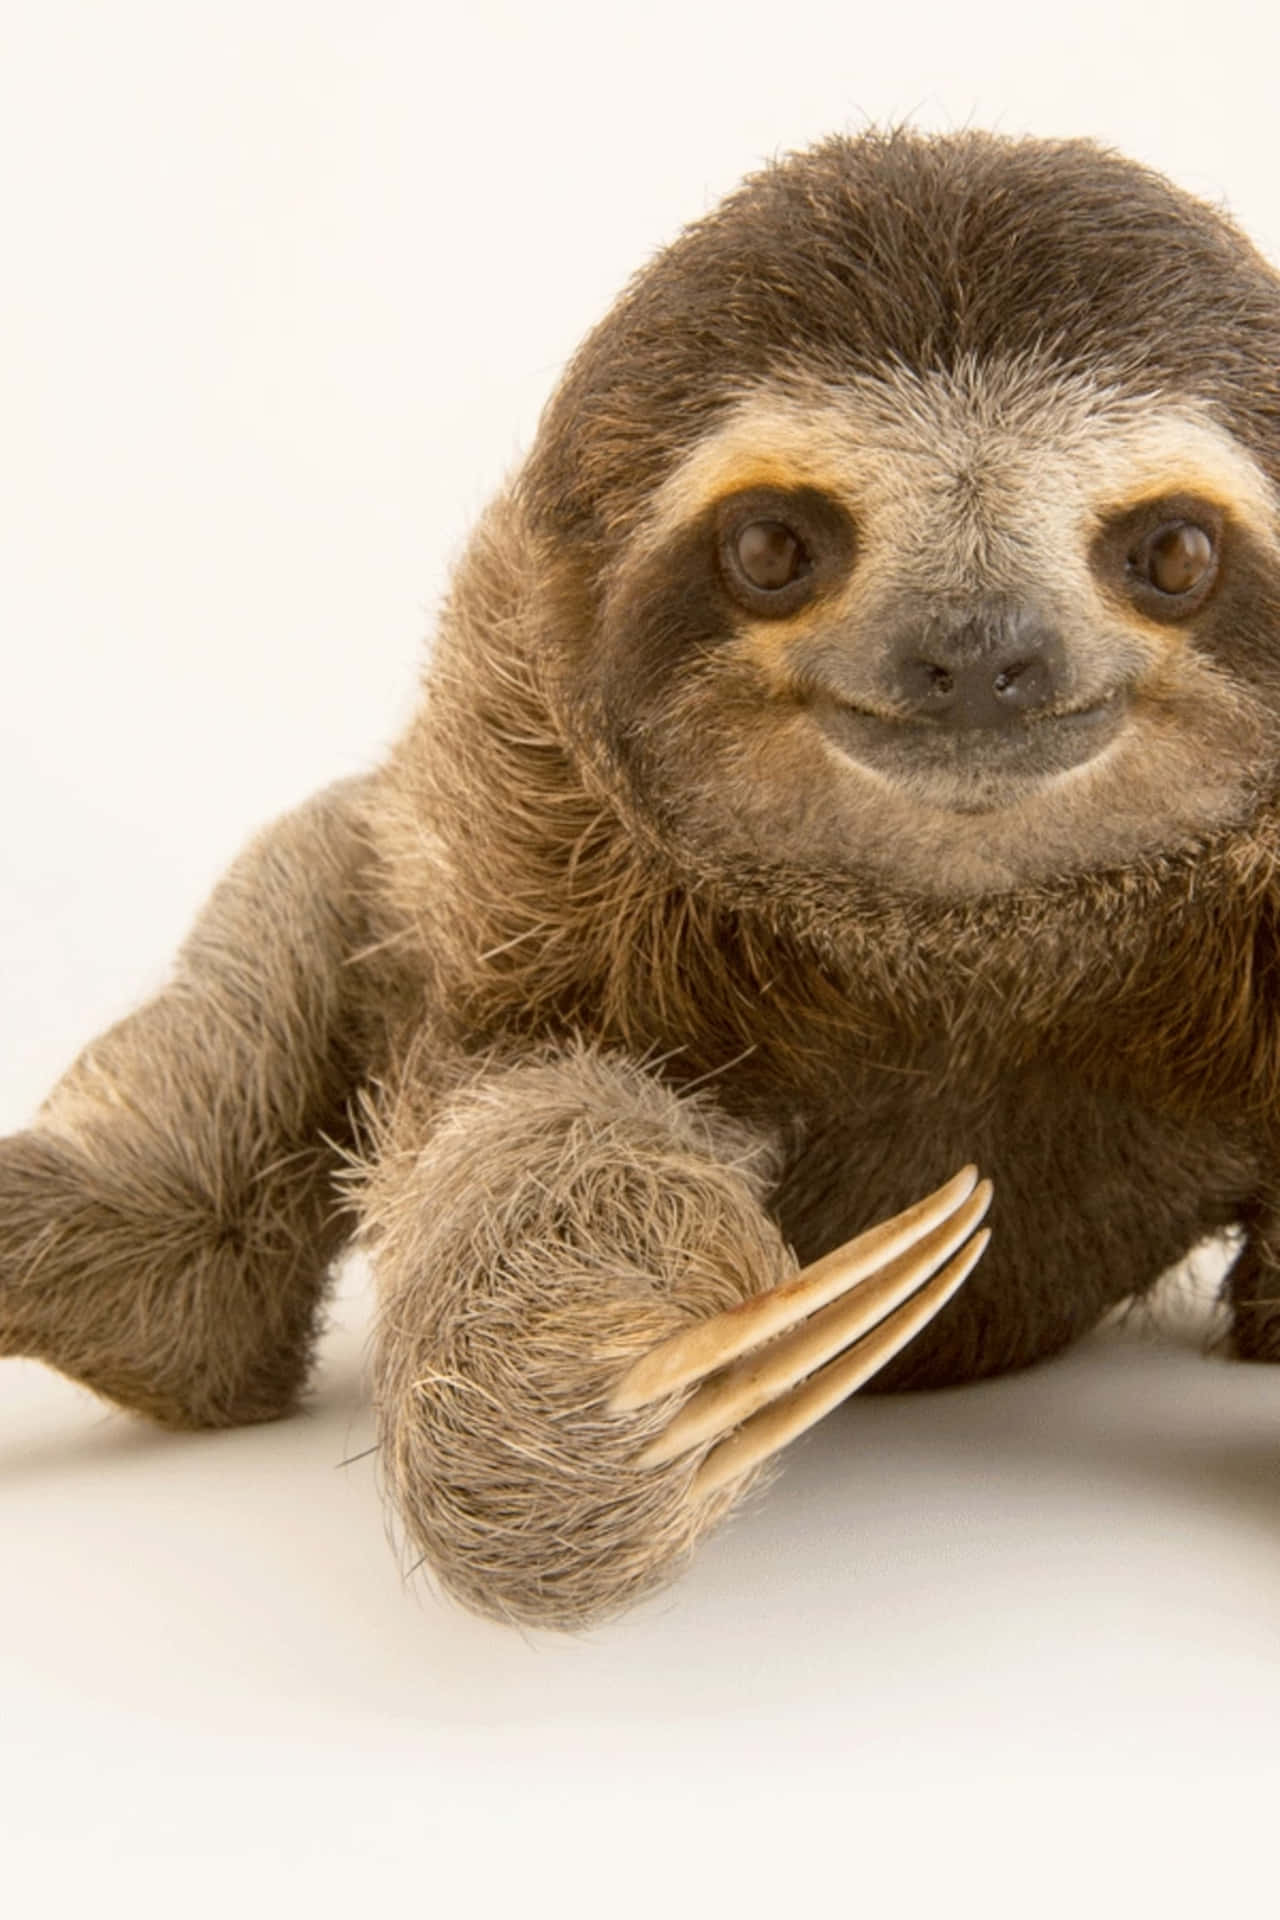 The Cuteness of a Sloth